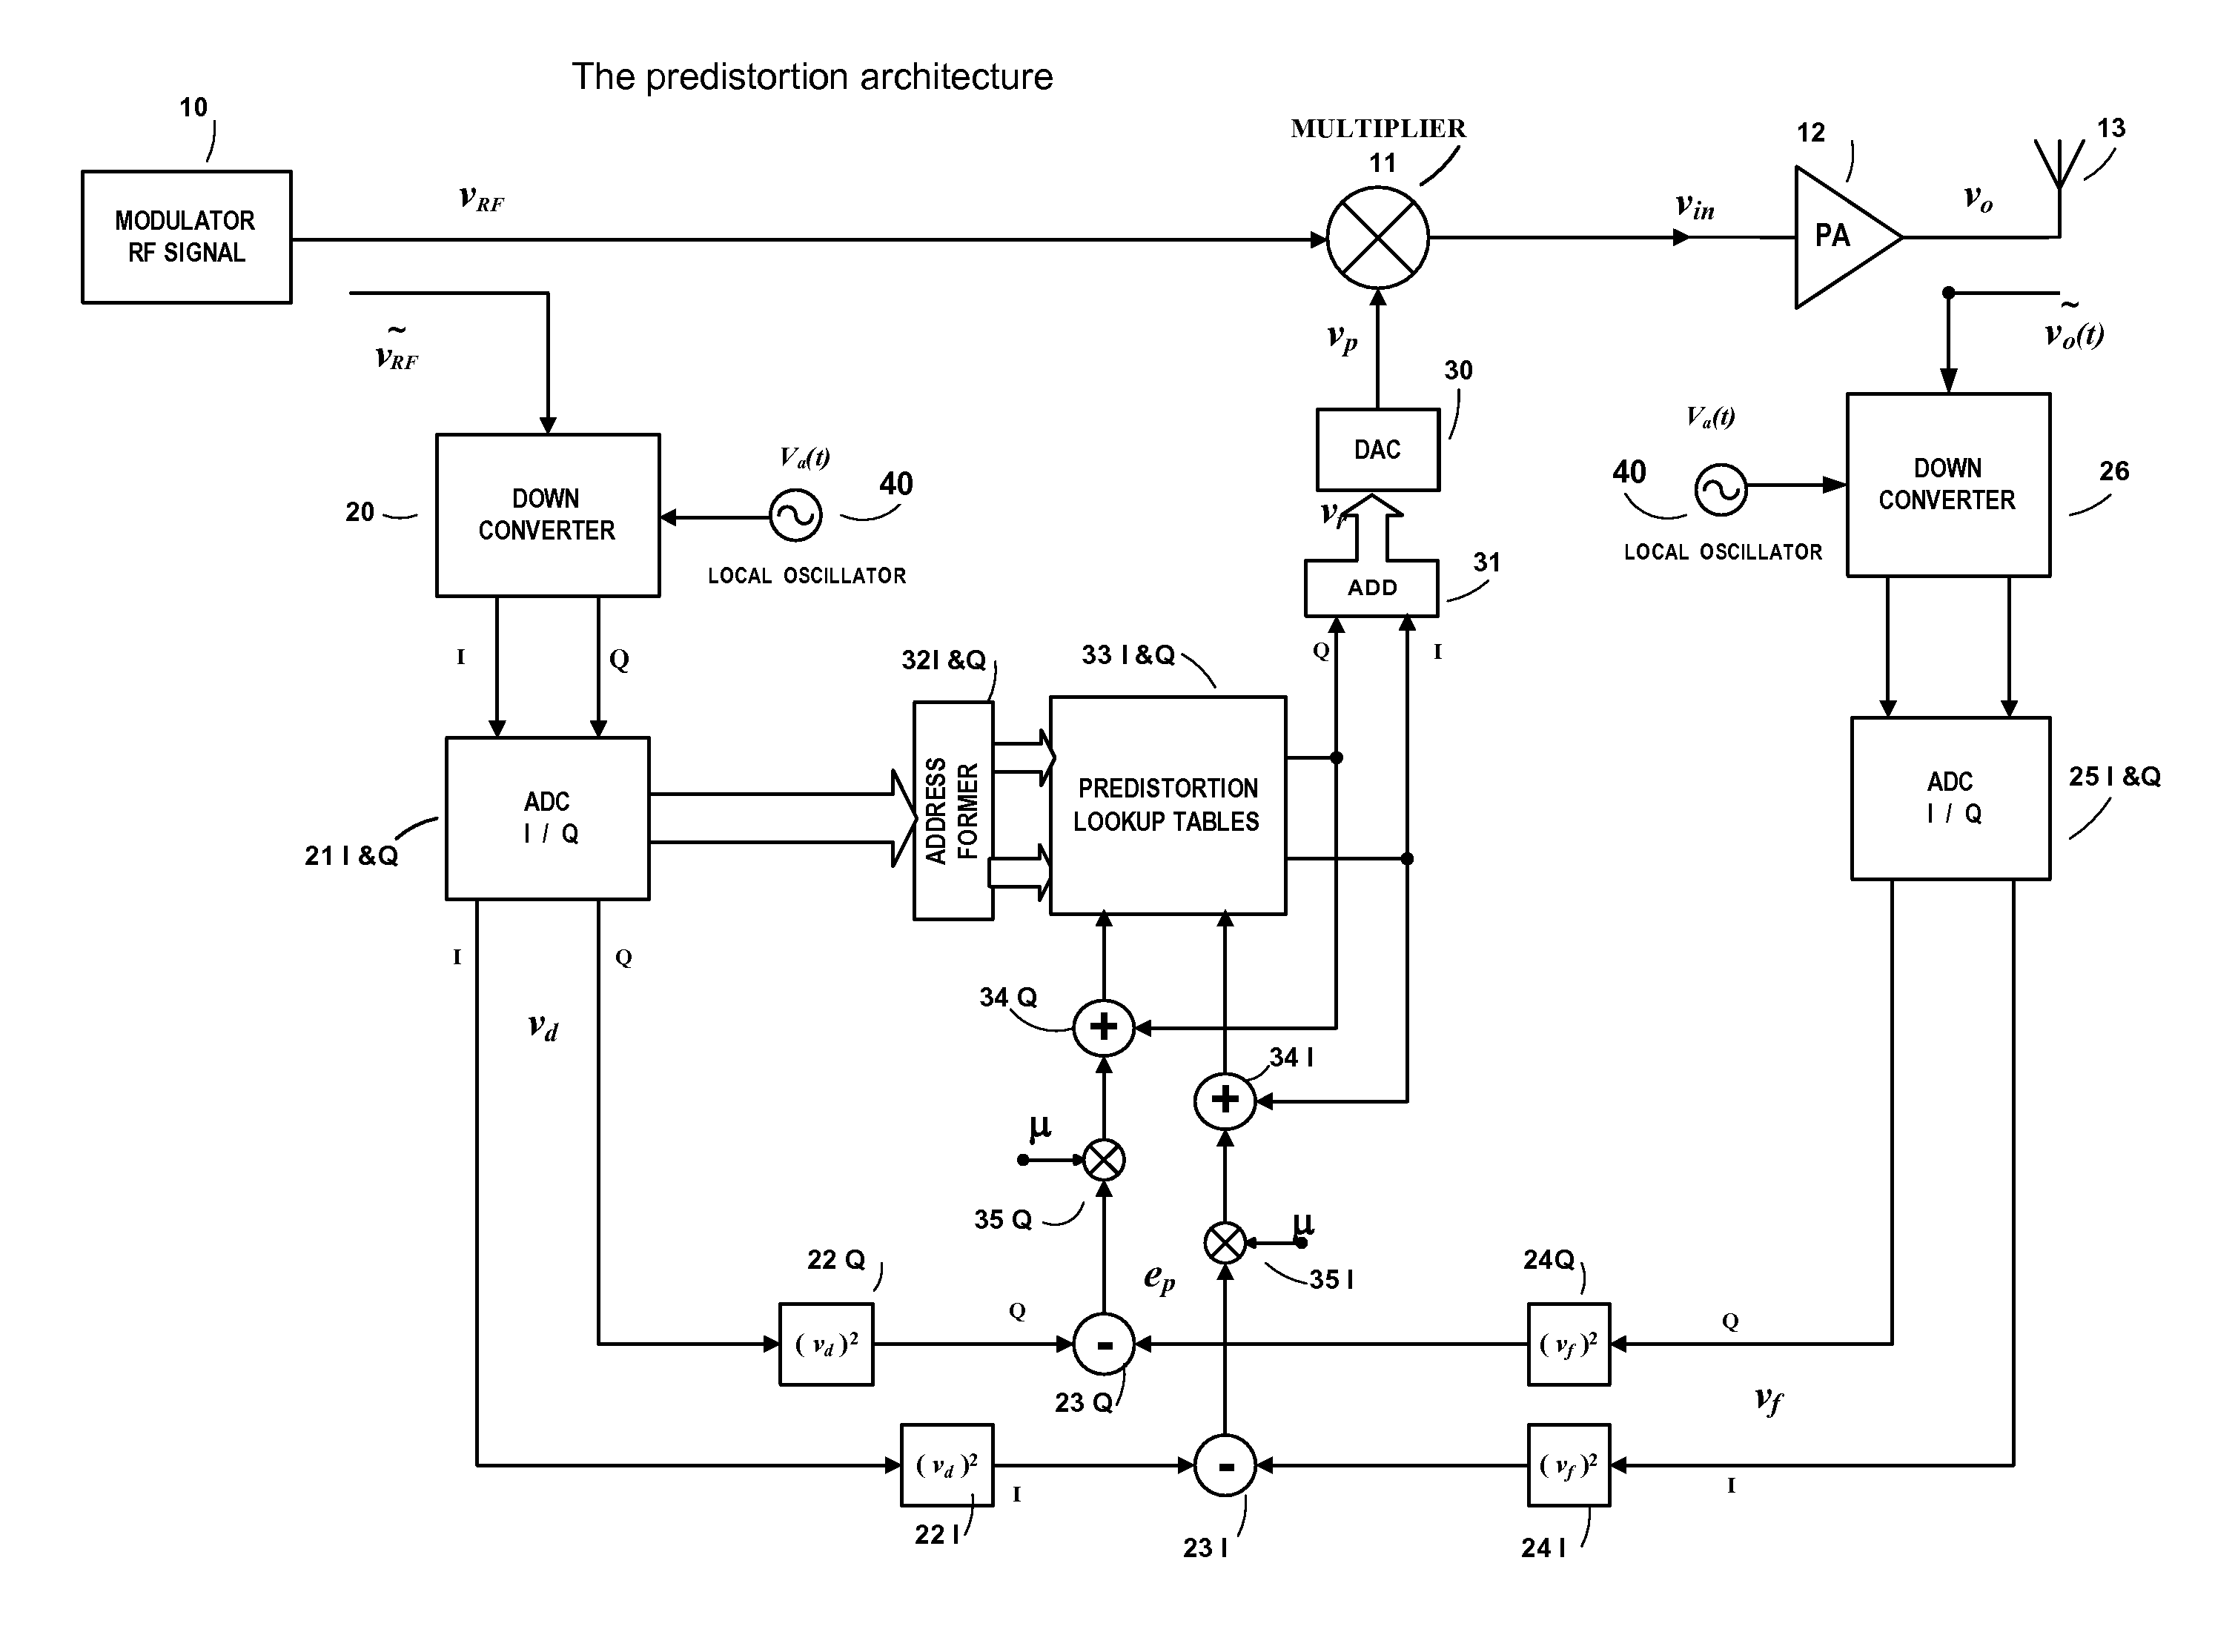 Power amplifier time-delay invariant predistortion methods and apparatus